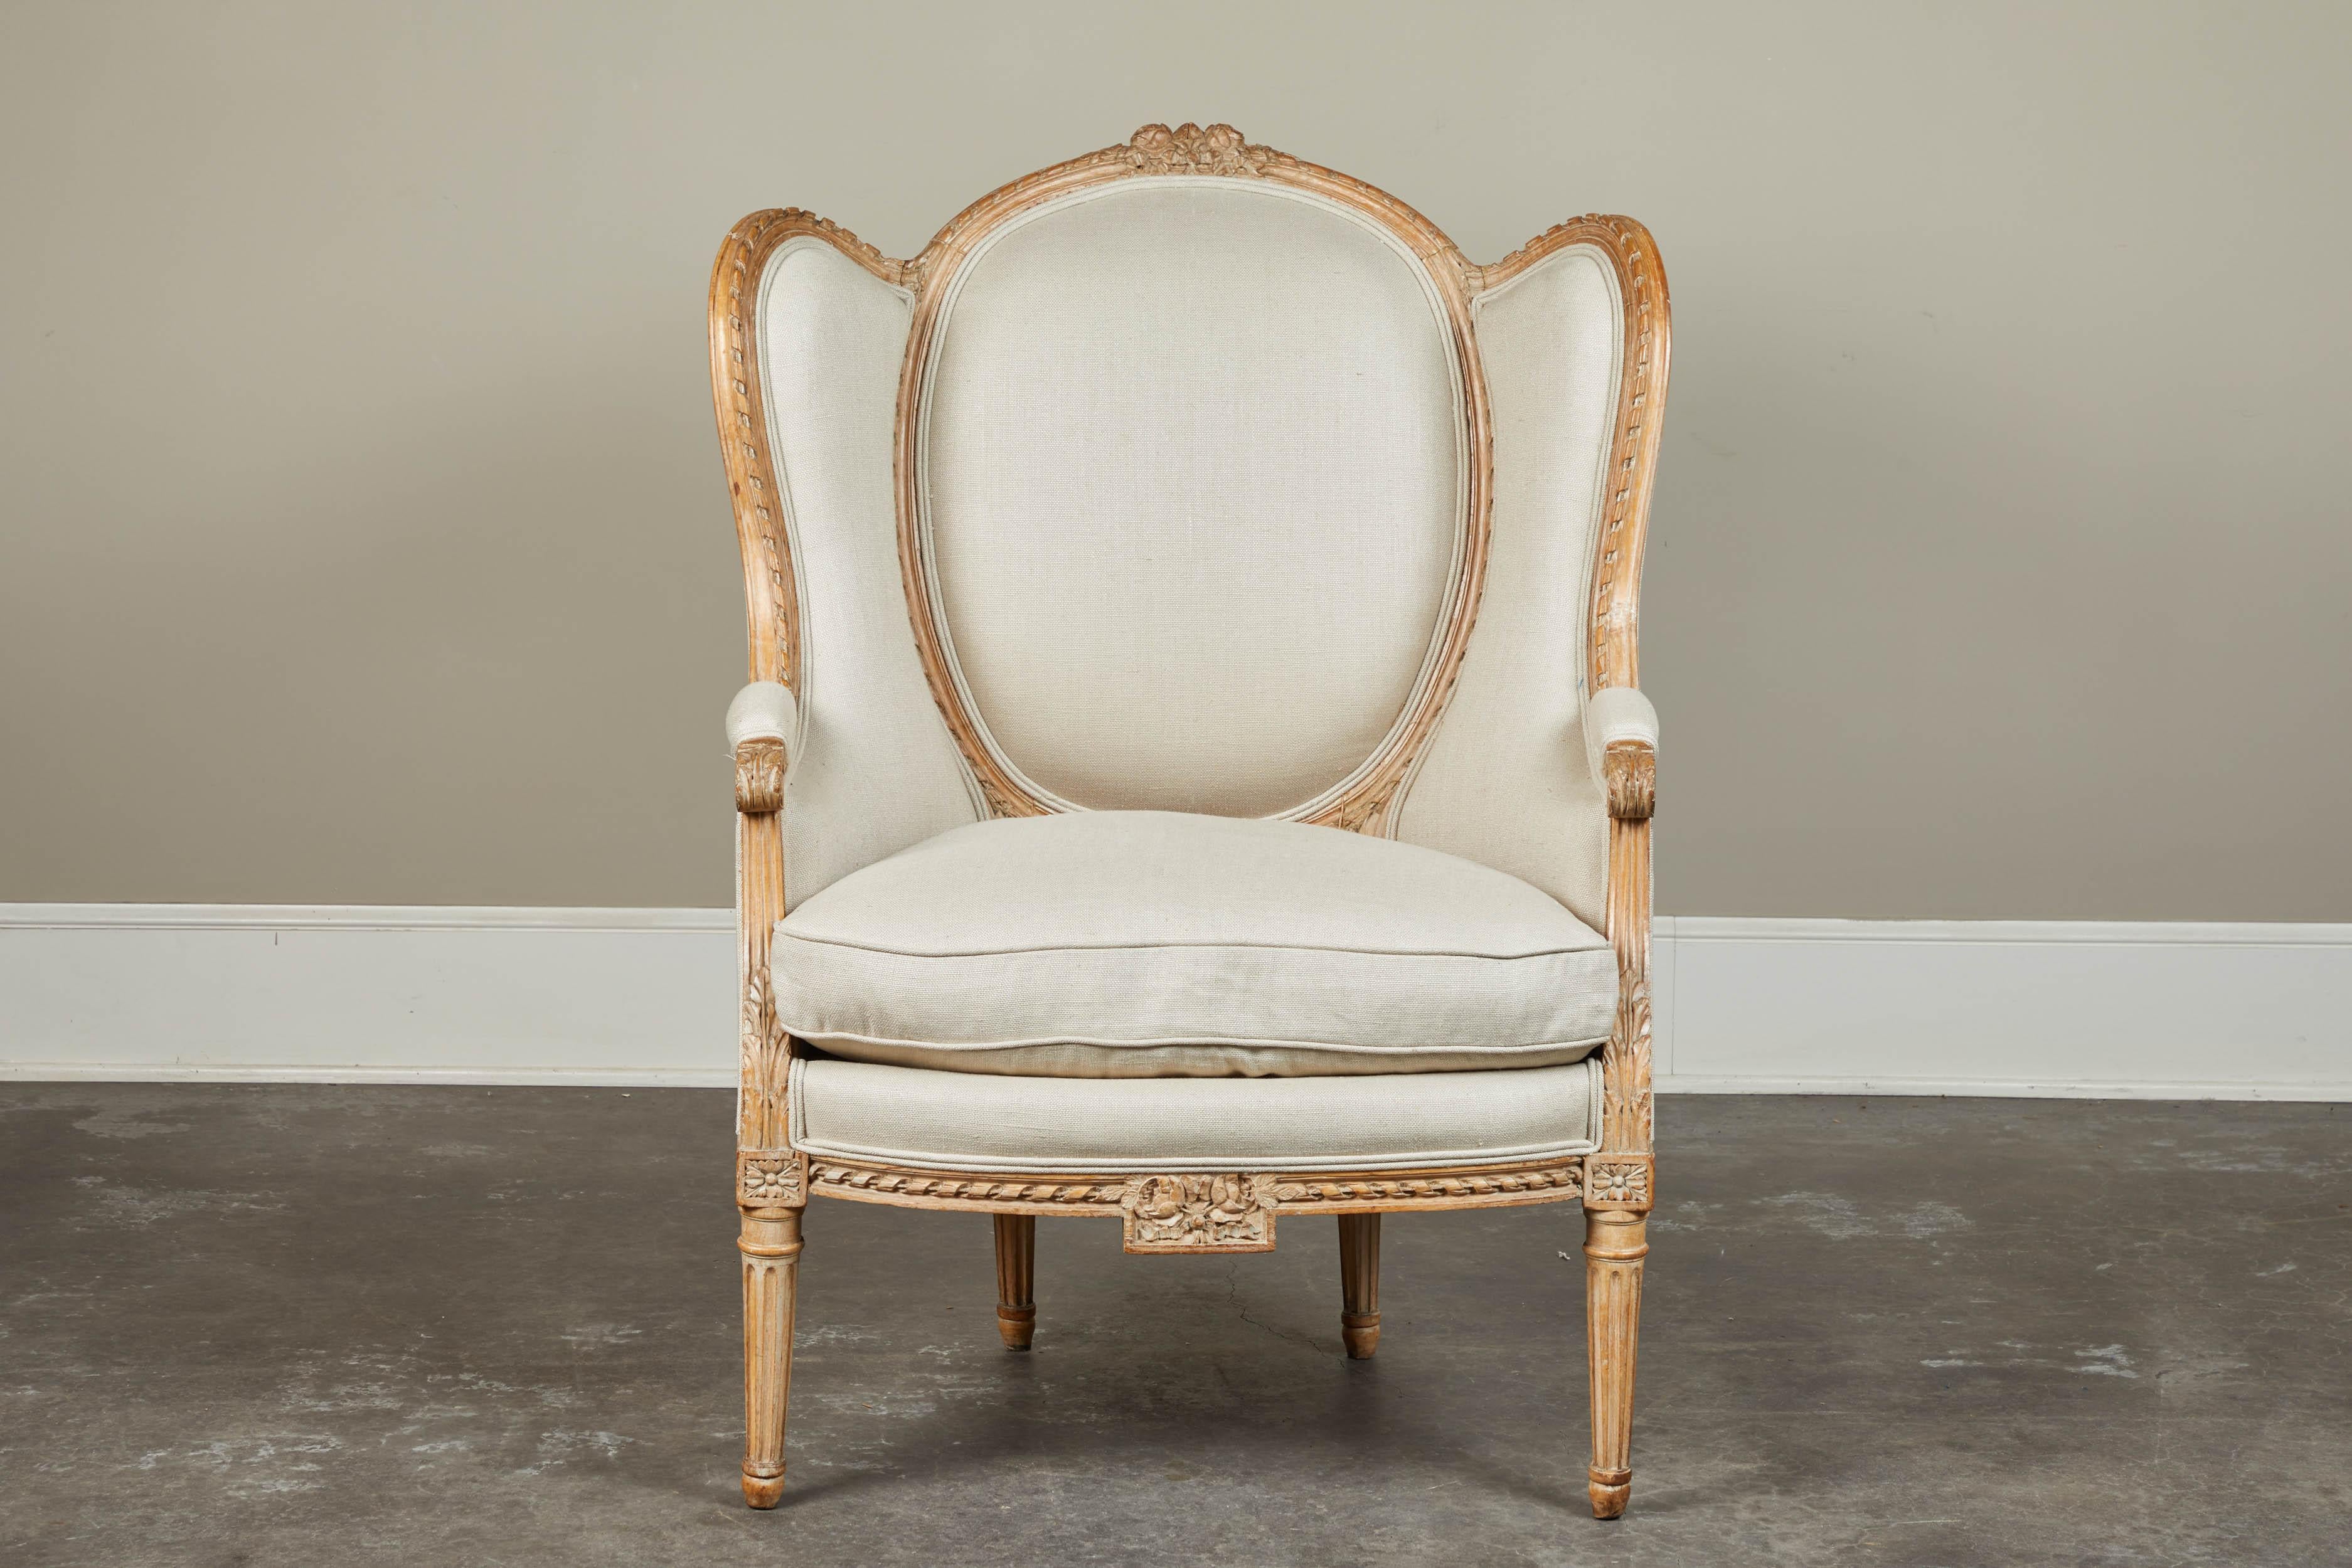 A very sweetly carved French wingback armchair with solid linen-look upholstery. Removable seat cushion and lighter wood trim, circa 19th century.